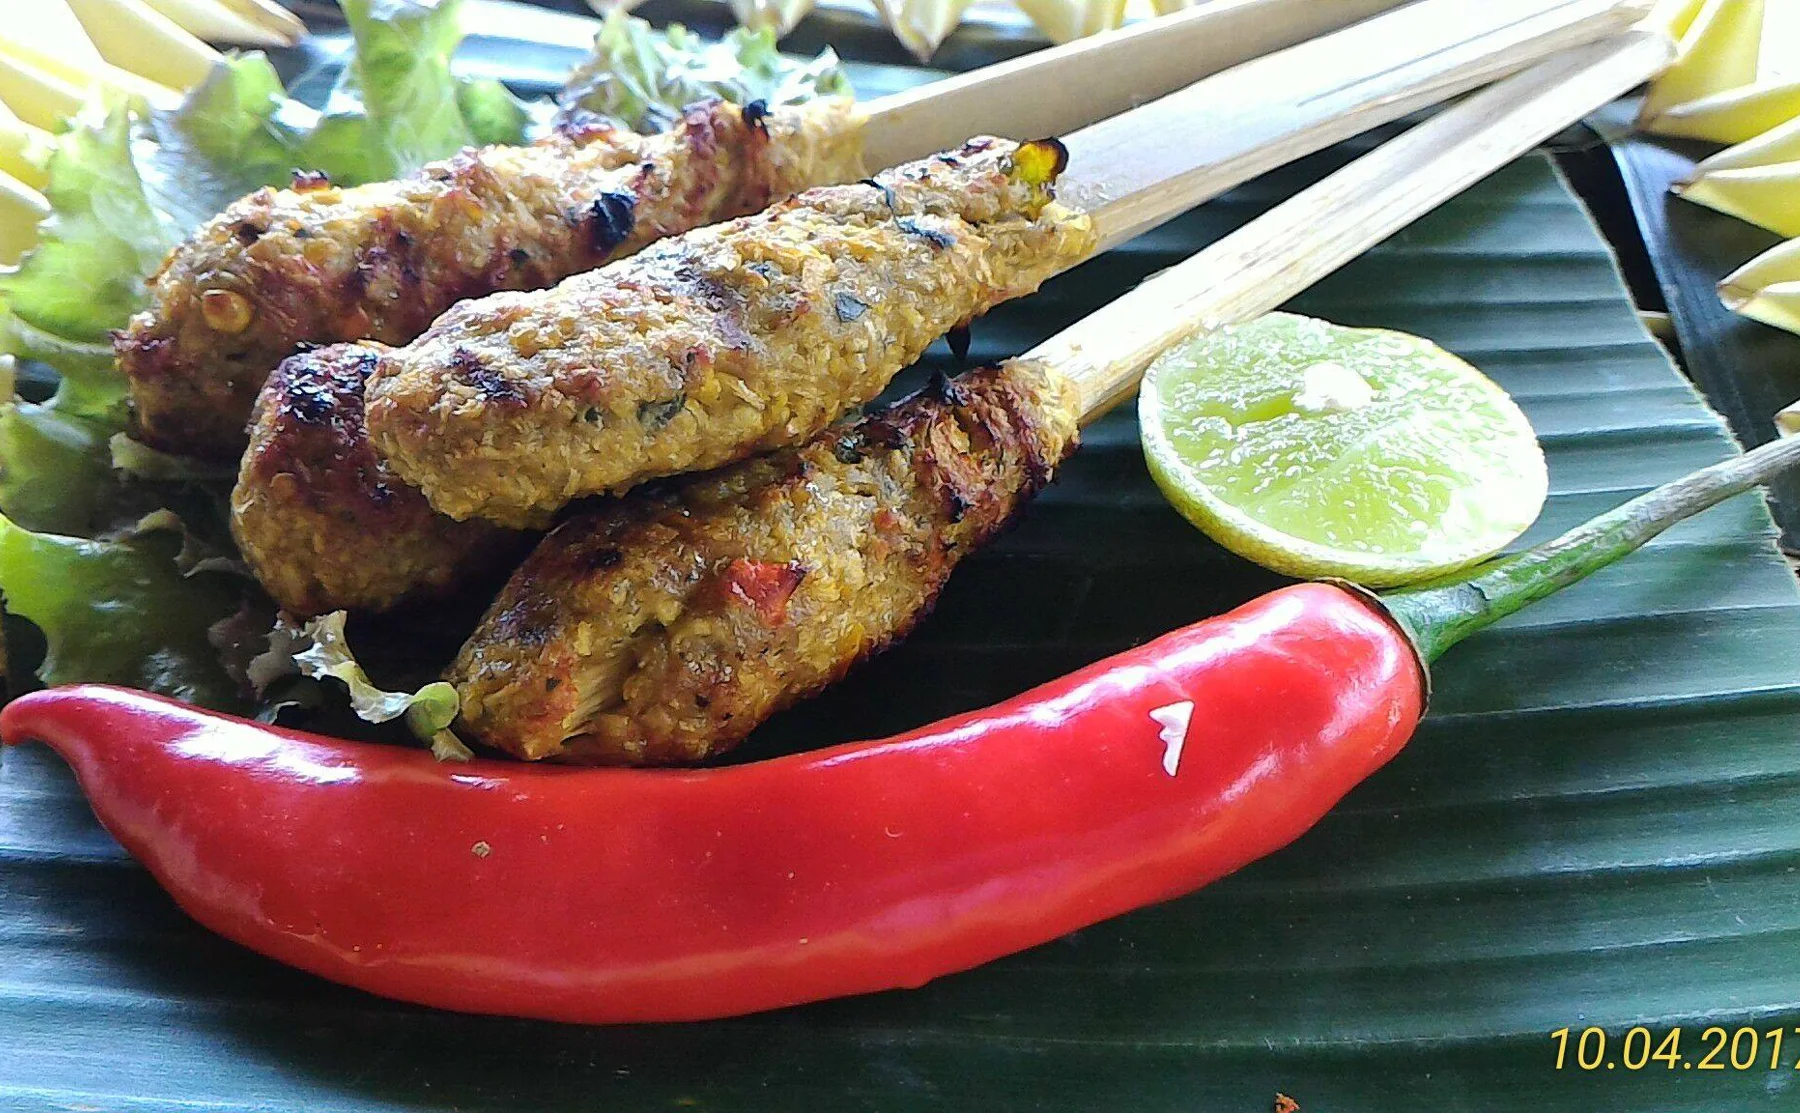 Cook Balinese food right in the middle of the organic farm - 1381720